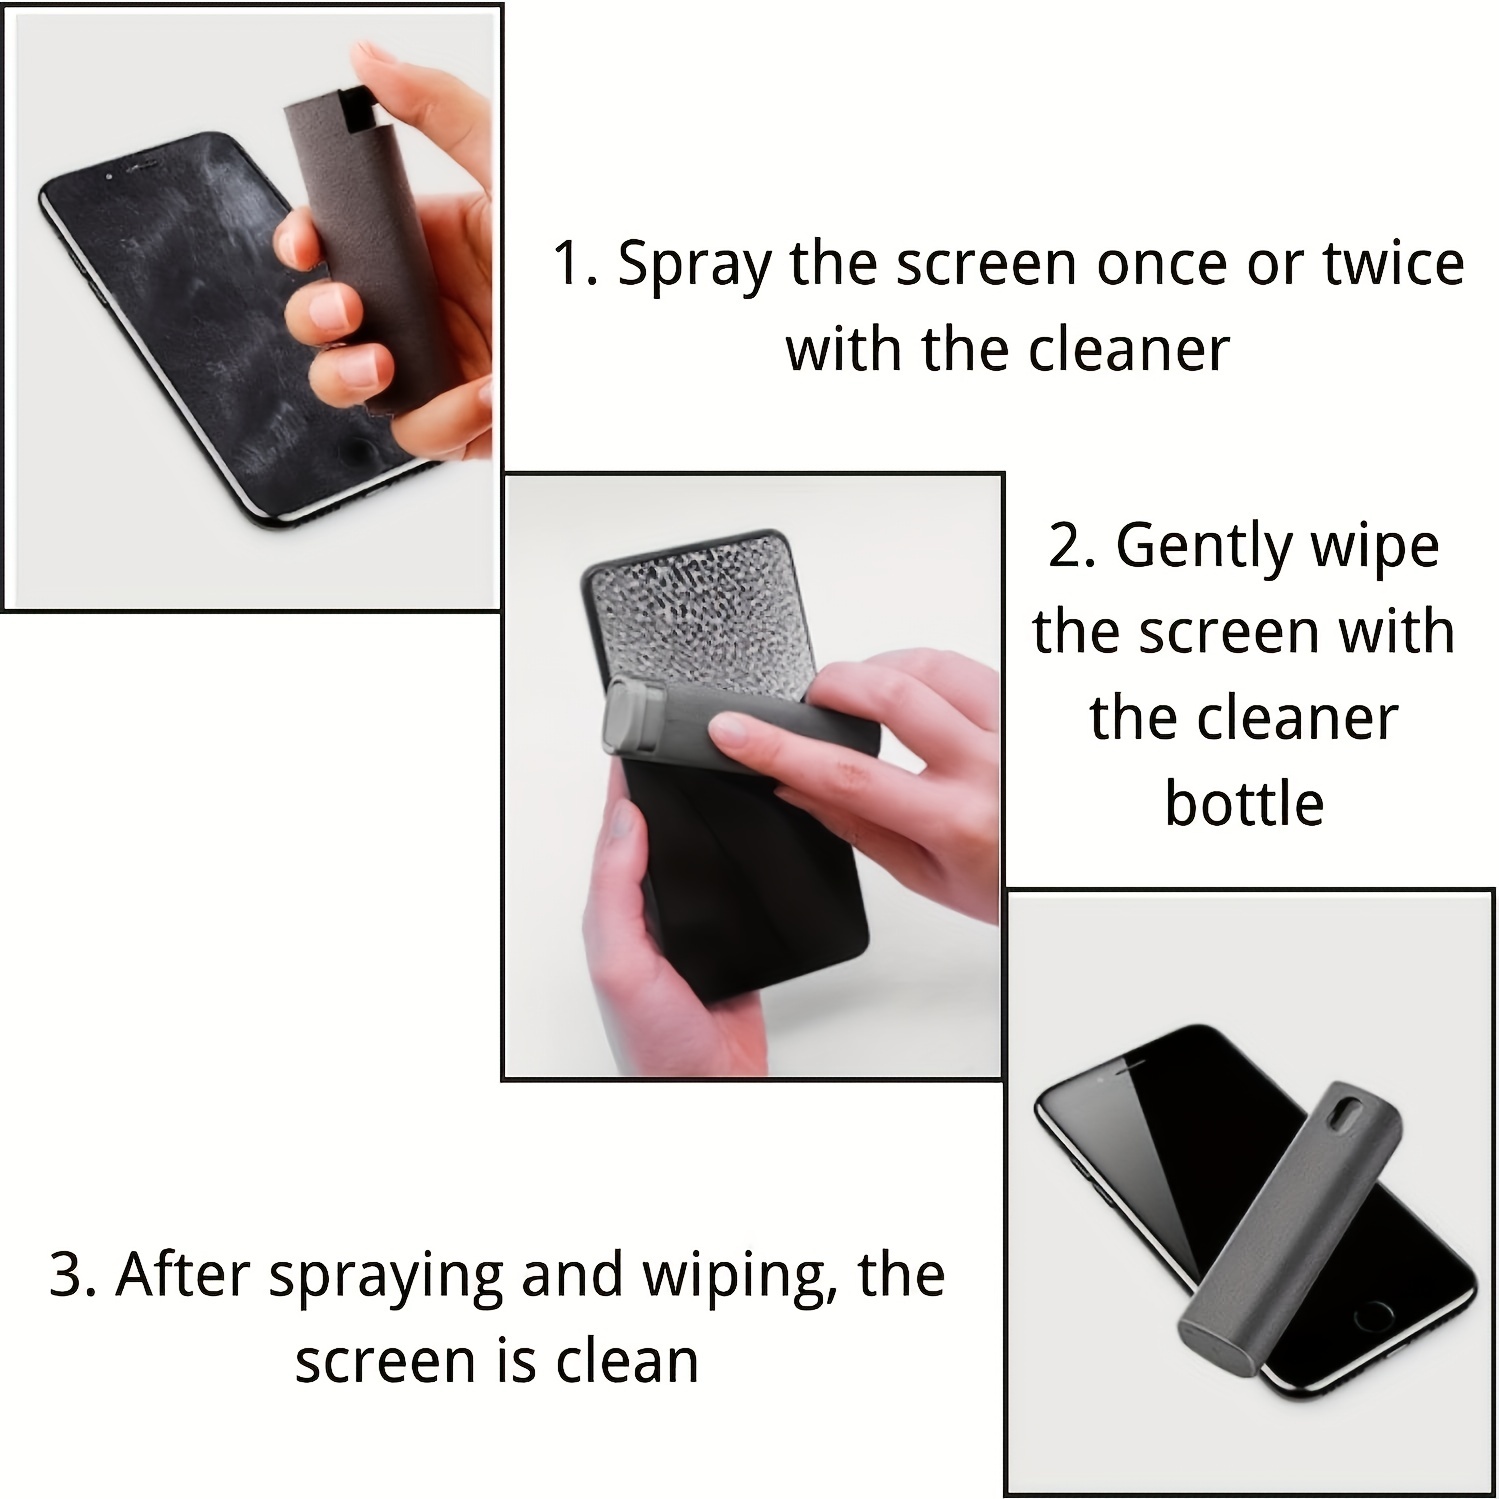 2 In 1 Phone Screen Cleaner Spray Bottle & Microfiber Cleaning